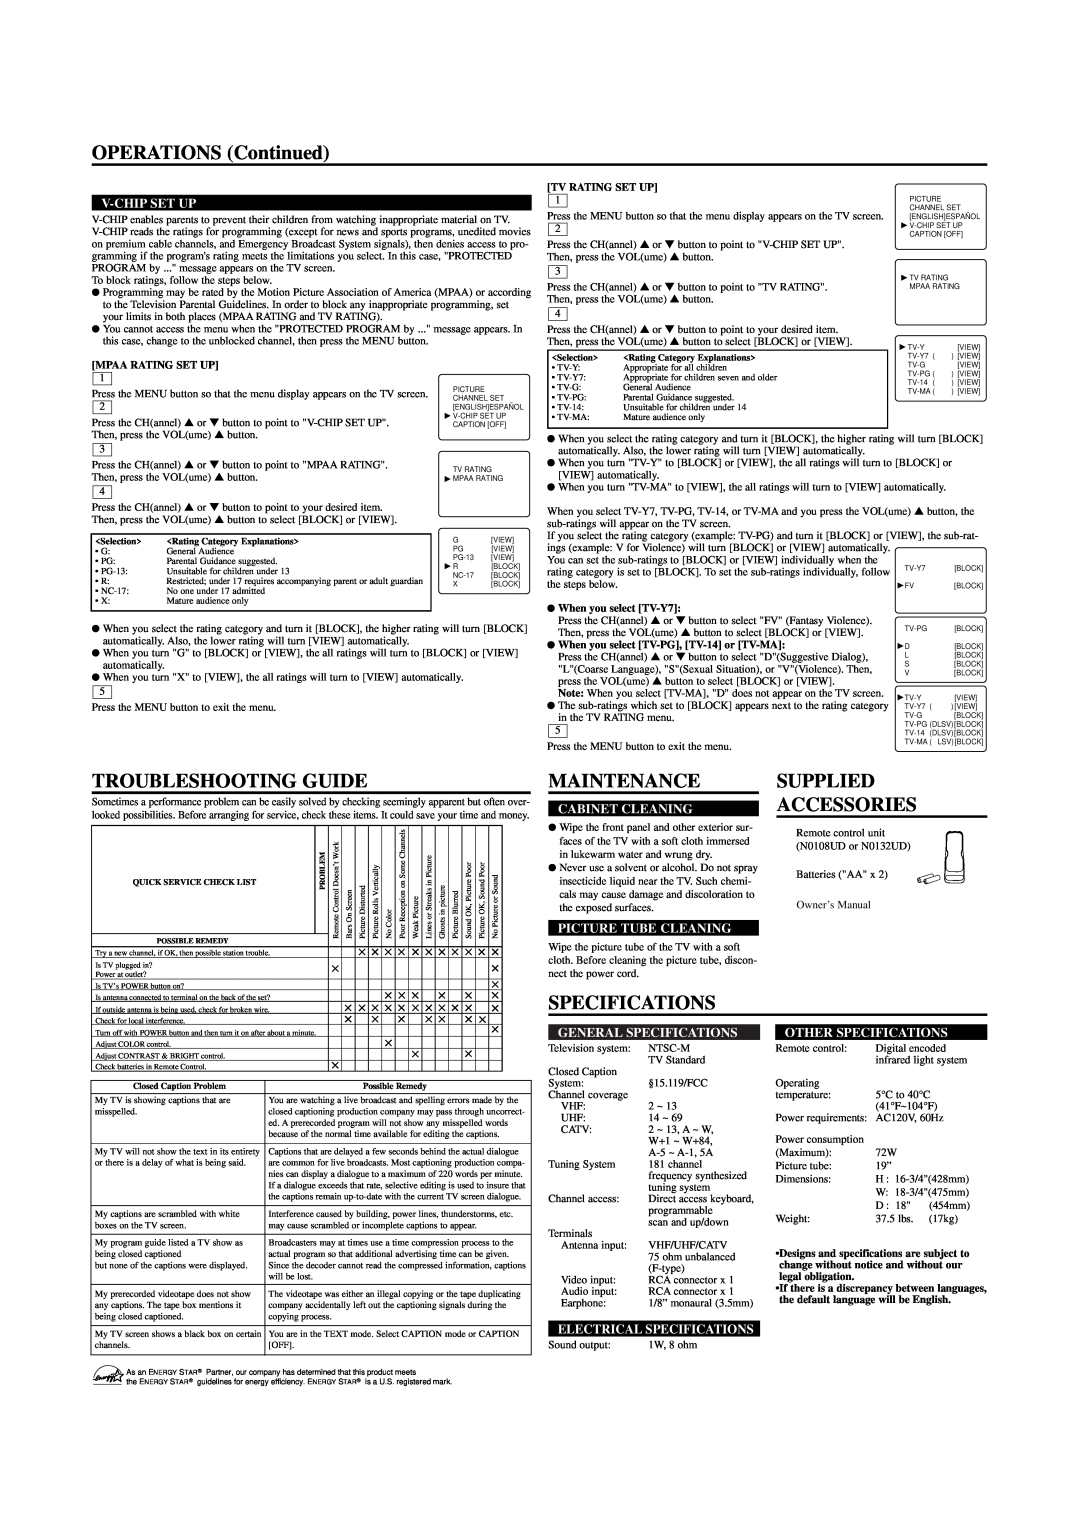 Sylvania 6419TBF OPERATIONS Continued, Troubleshooting Guide, Maintenance, Supplied Accessories, Specifications 